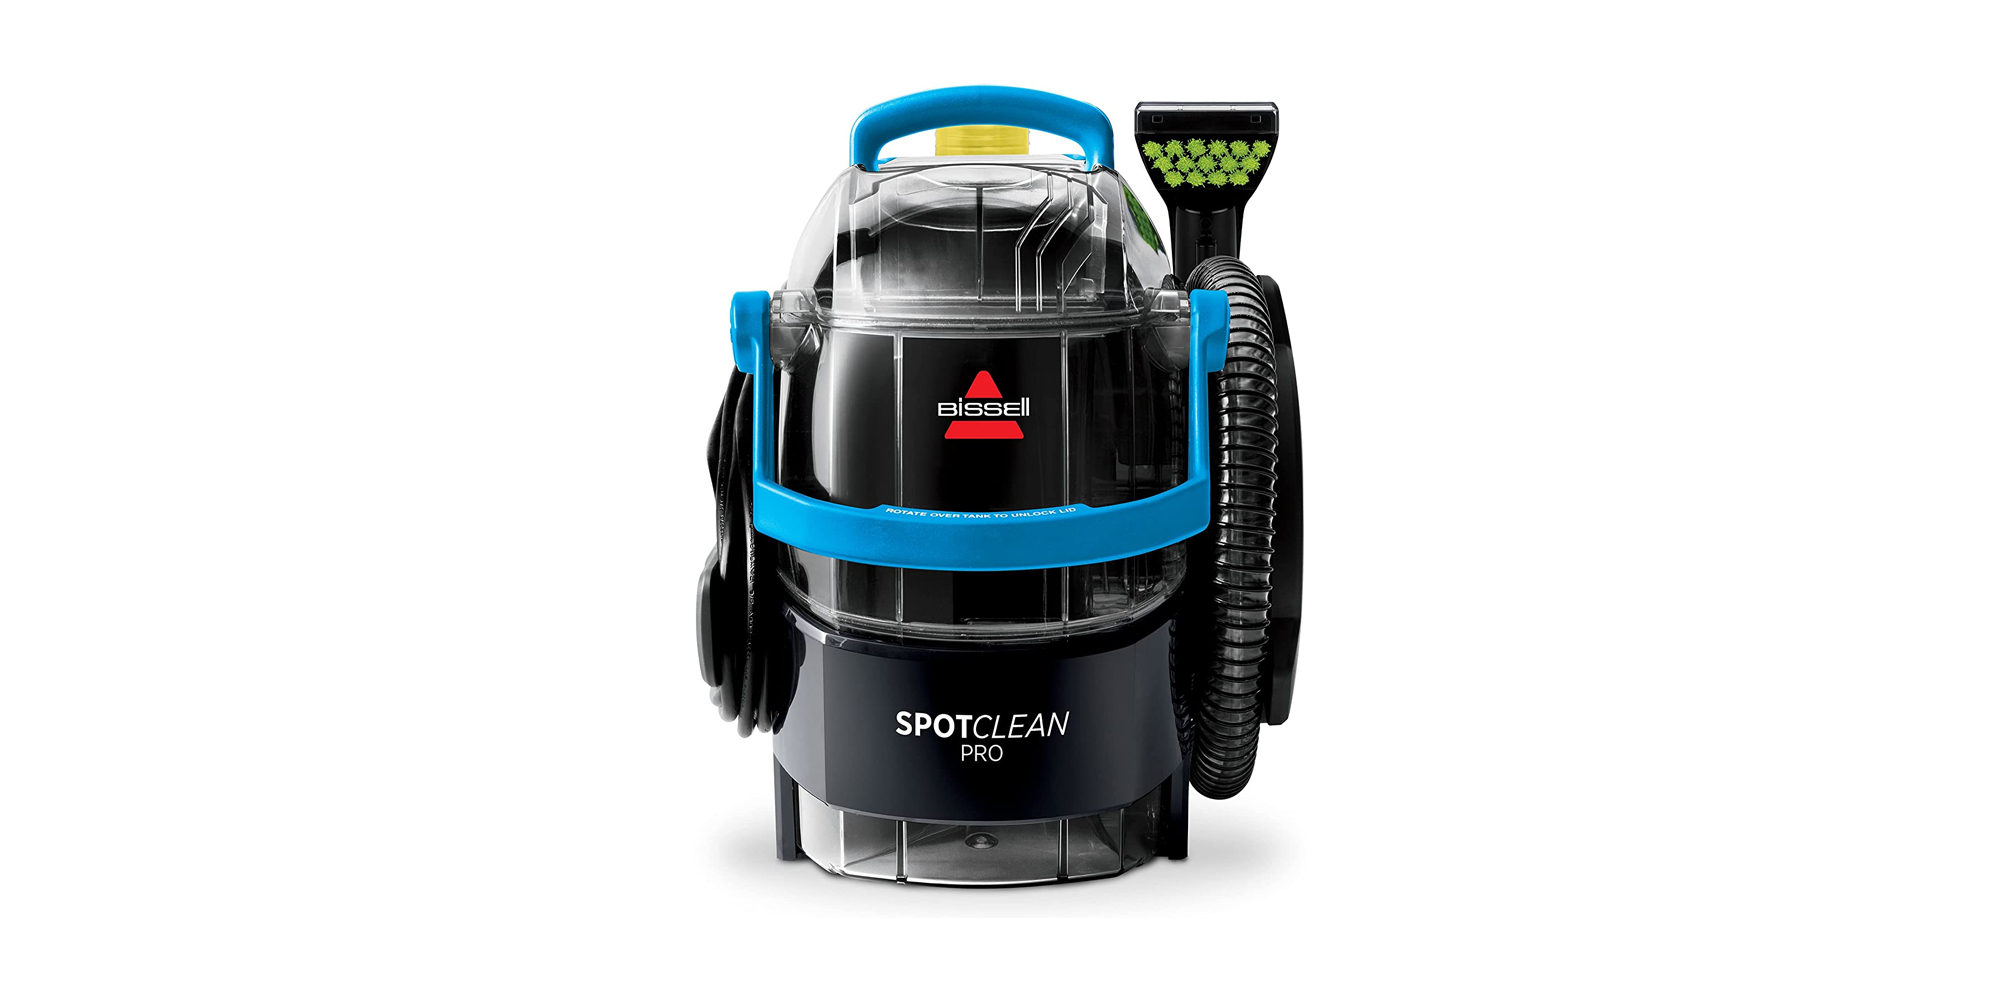 https://9to5toys.com/wp-content/uploads/sites/5/2022/04/bissell-spotcleaner-pro-carpet-cleaner.jpg